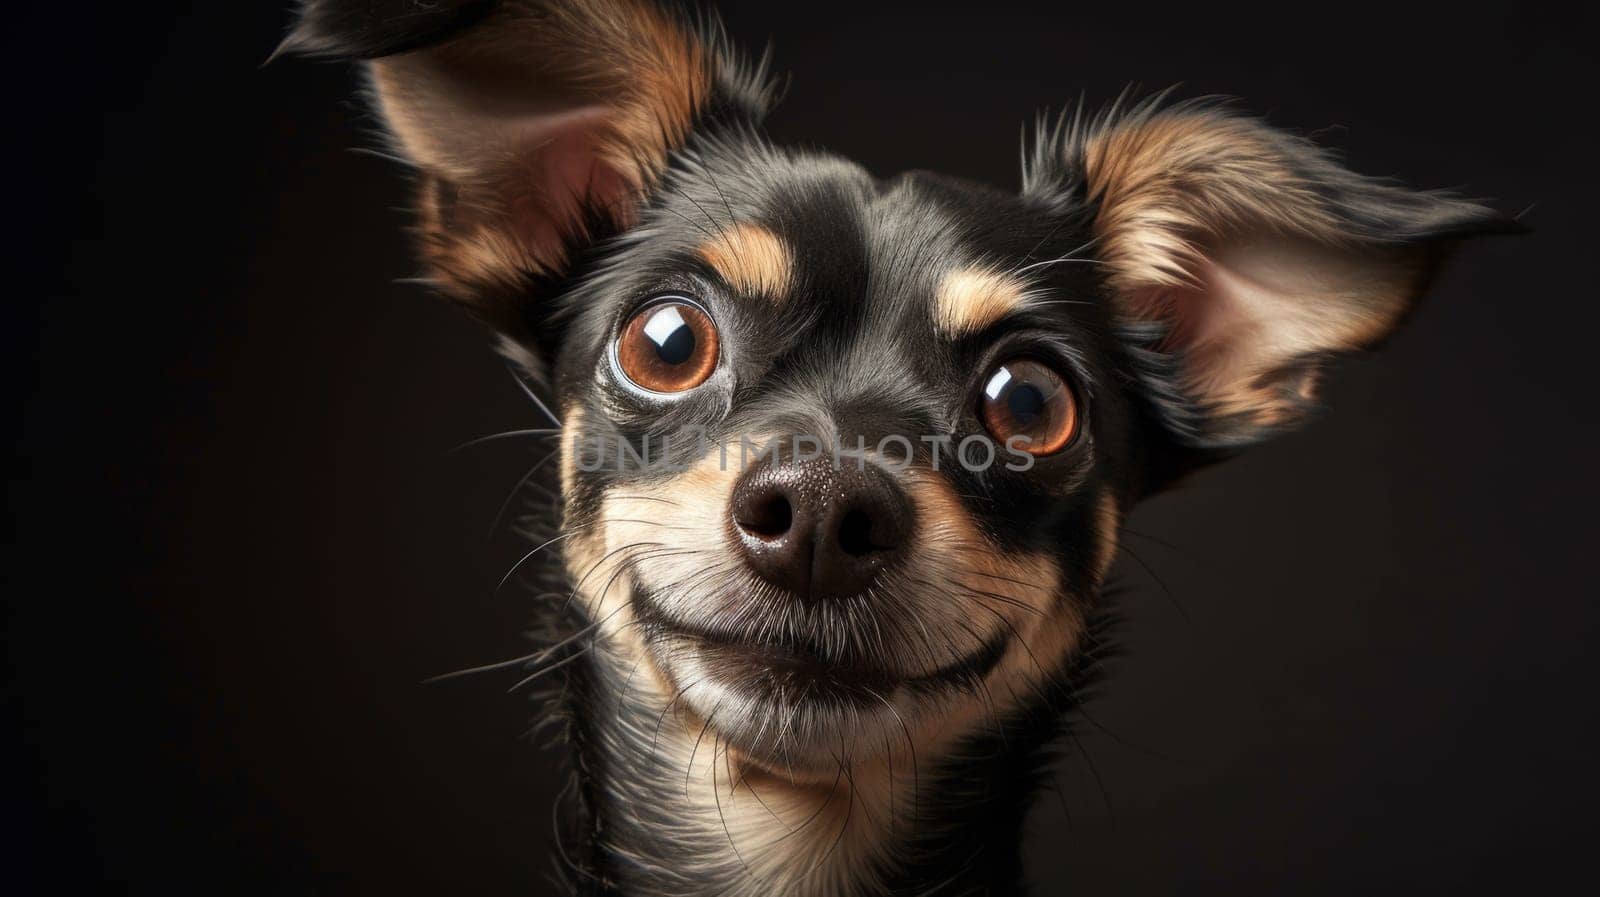 A close up of a dog with big brown eyes and ears, AI by starush